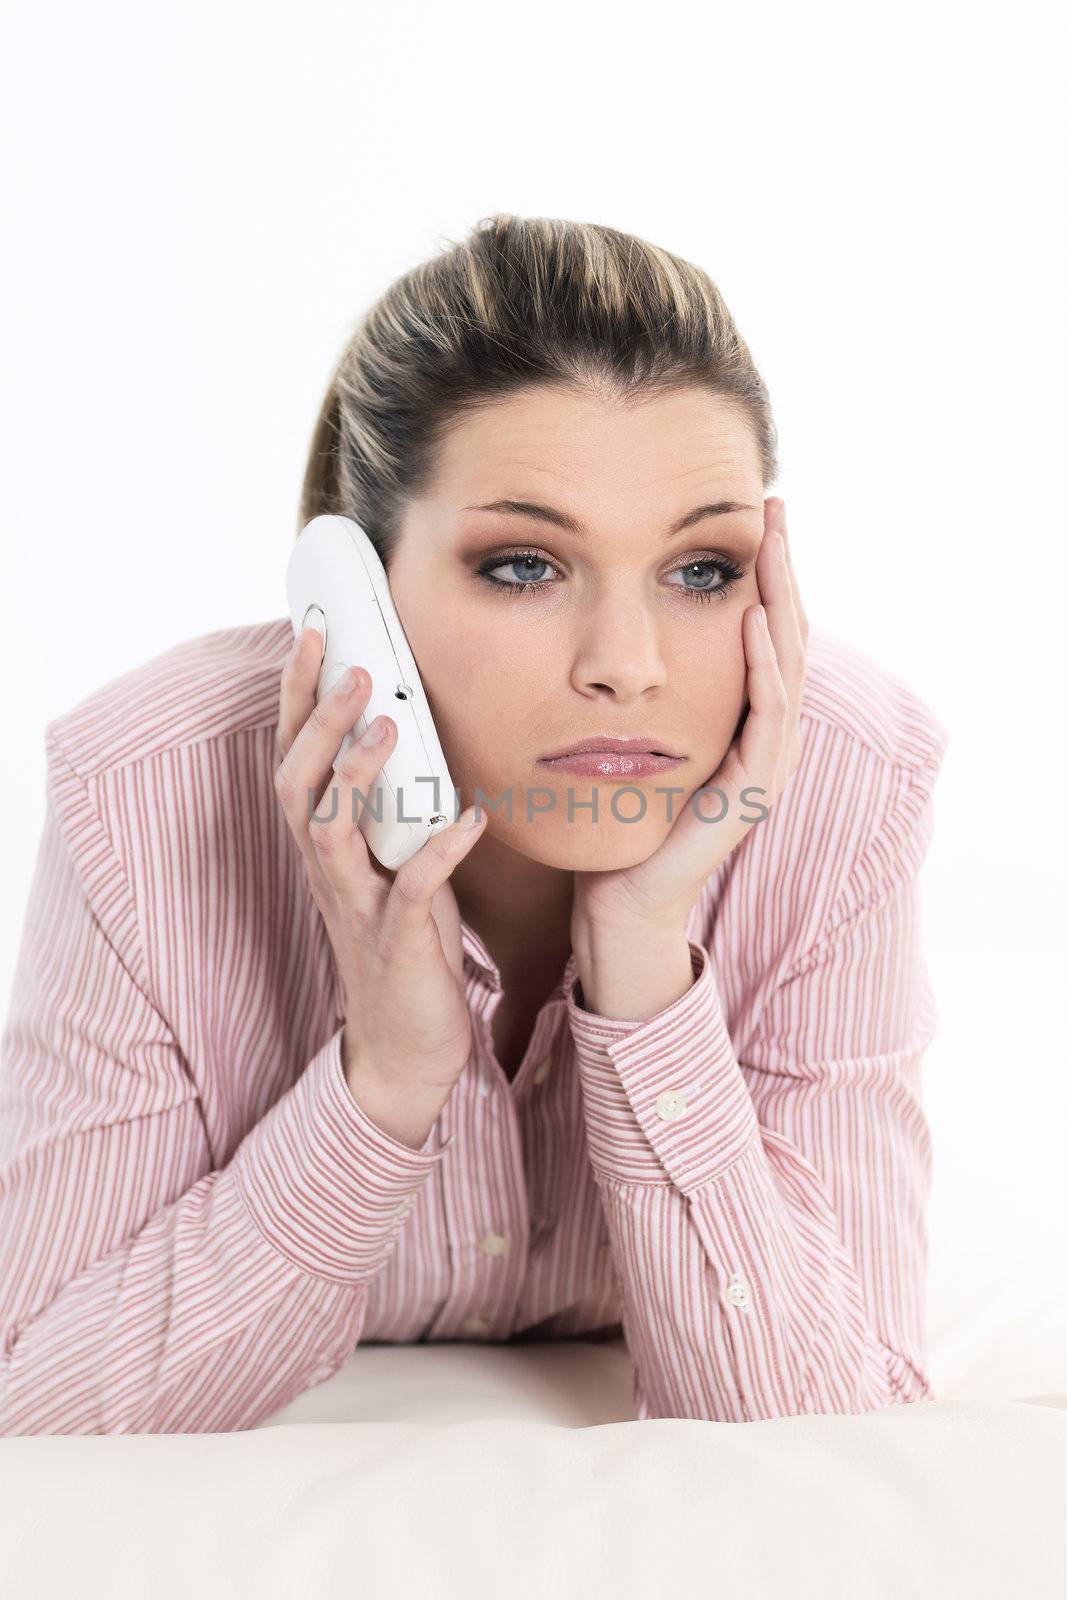 Upset, sad and worried by problems young woman talking by the phone.